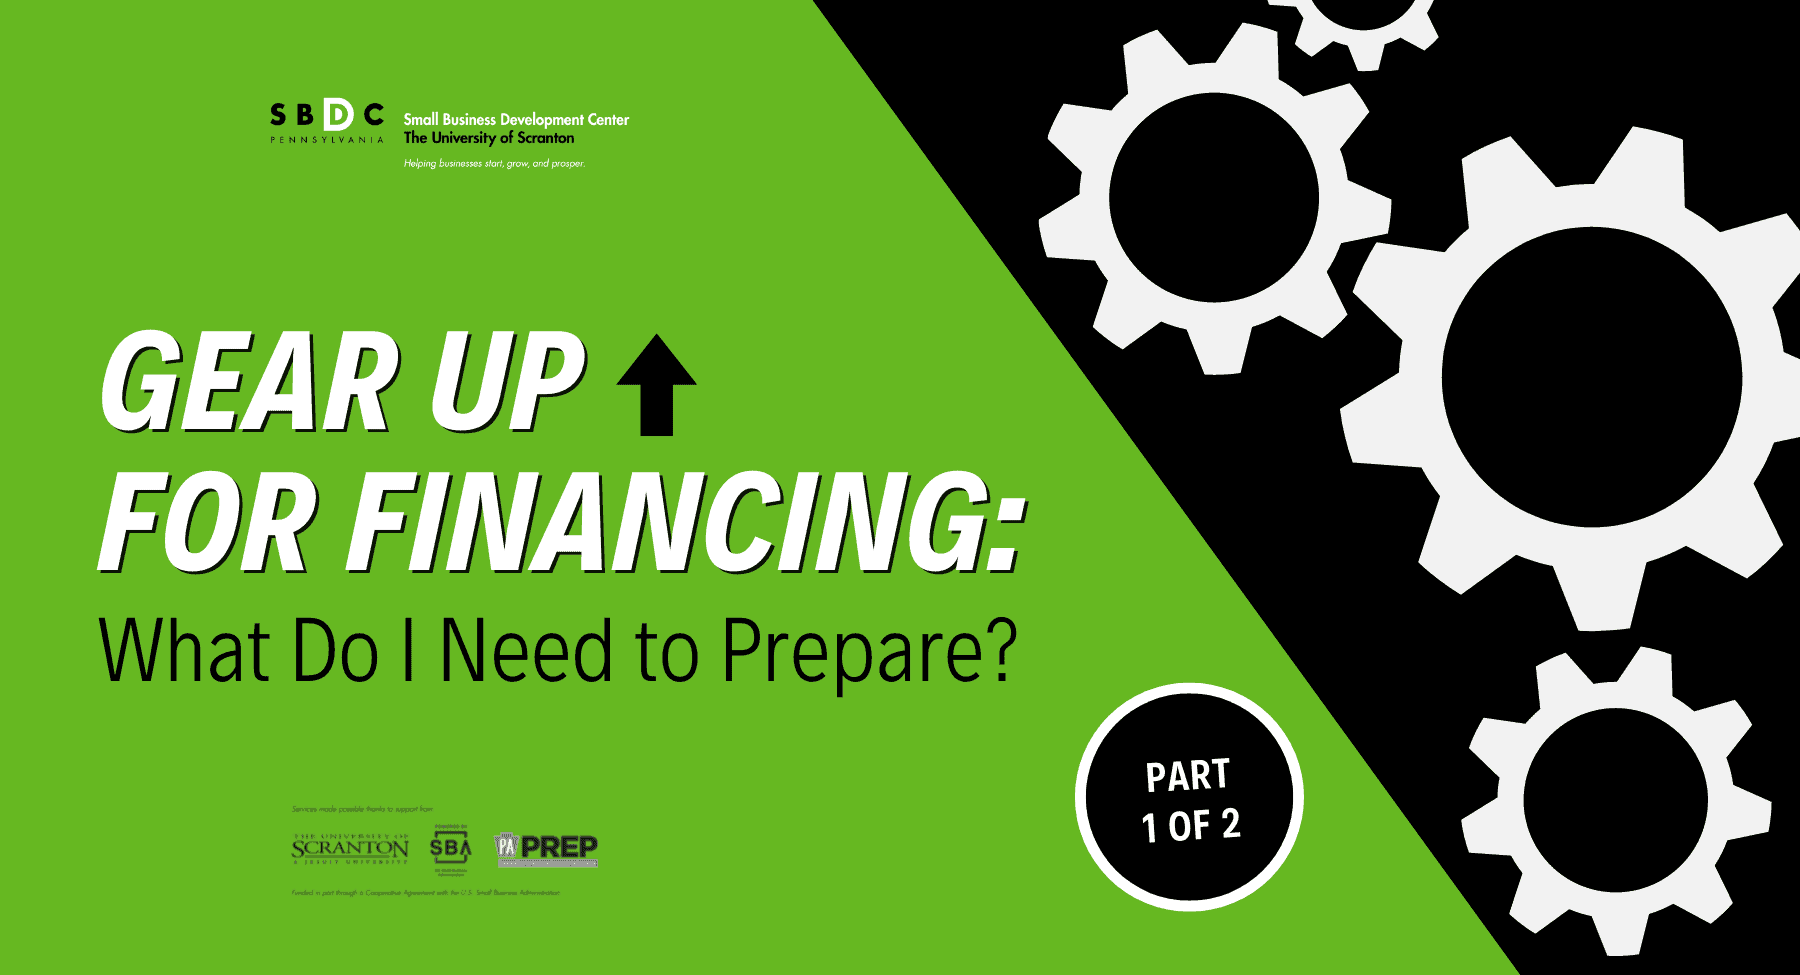 Gear Up for Financing: What Do I Need to Prepare?